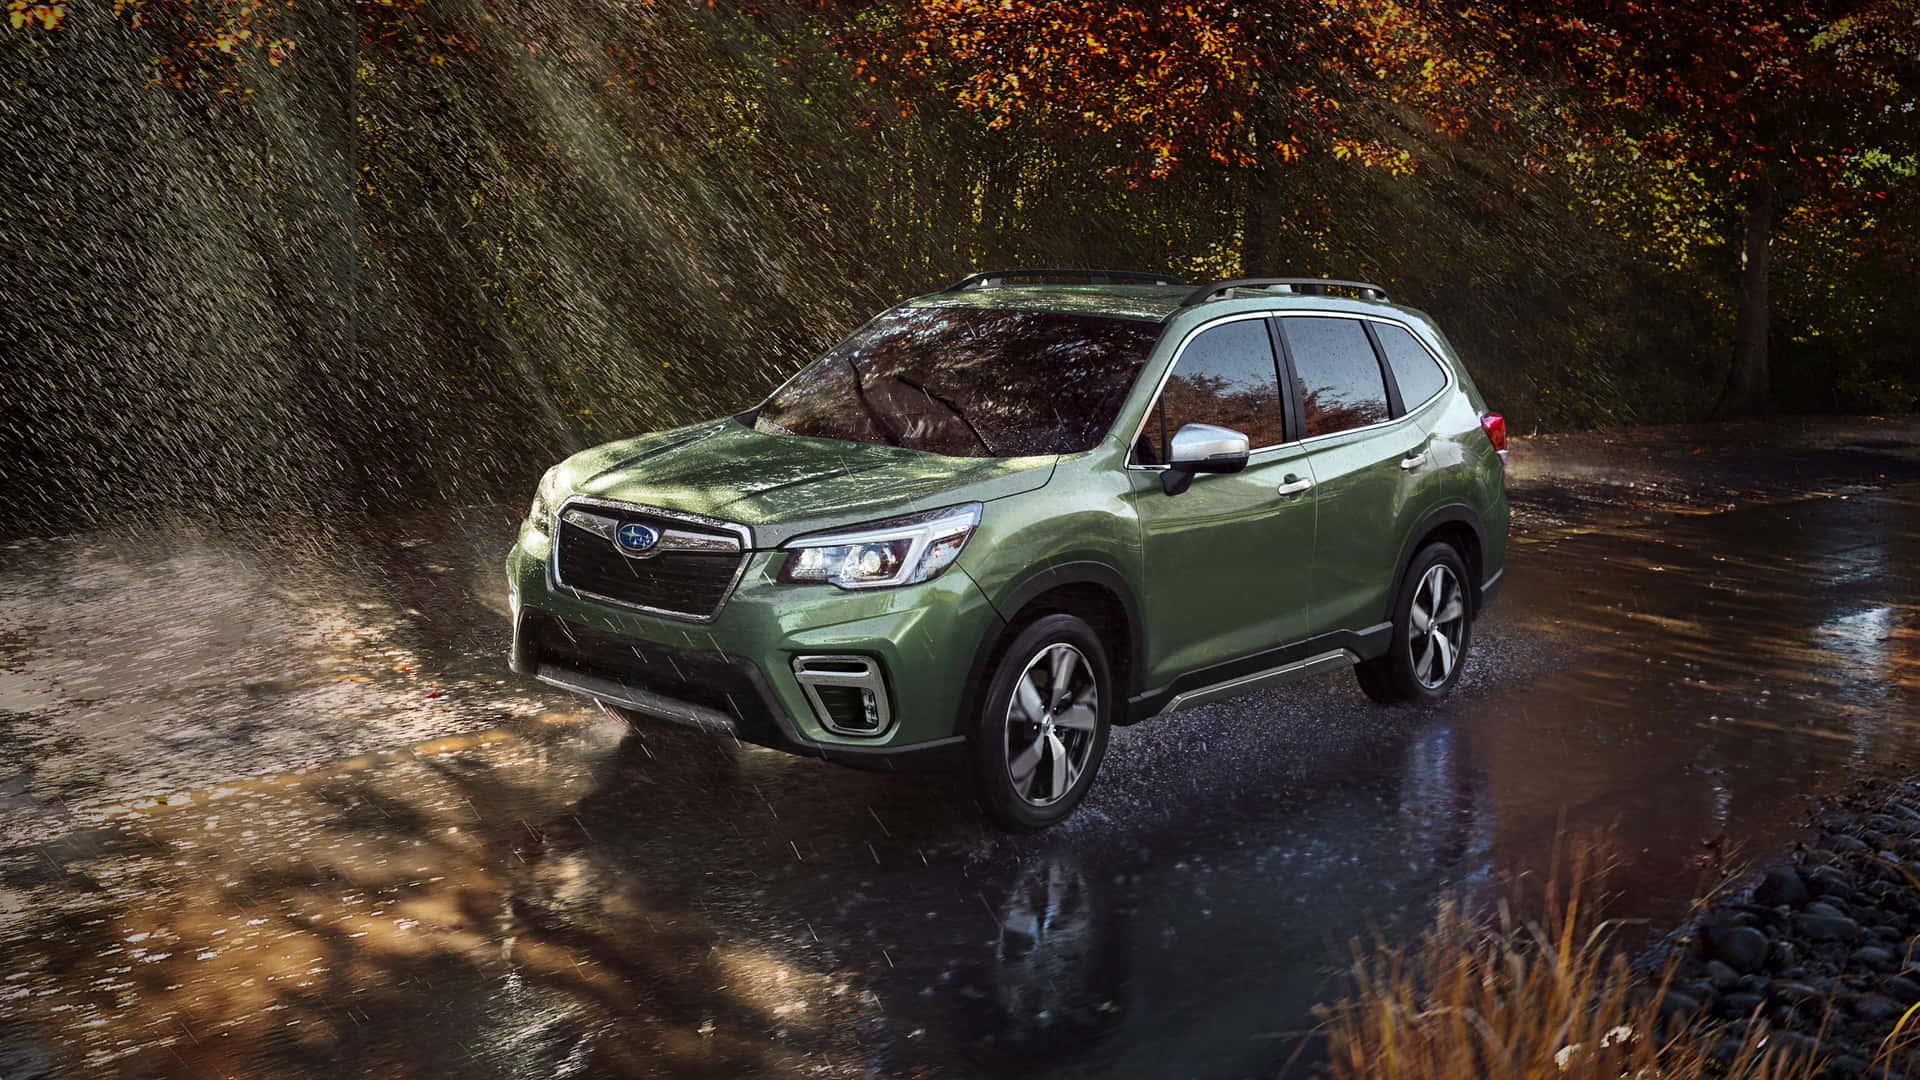 Caption: Swerving Subaru Forester Amid Lush Greenery Wallpaper